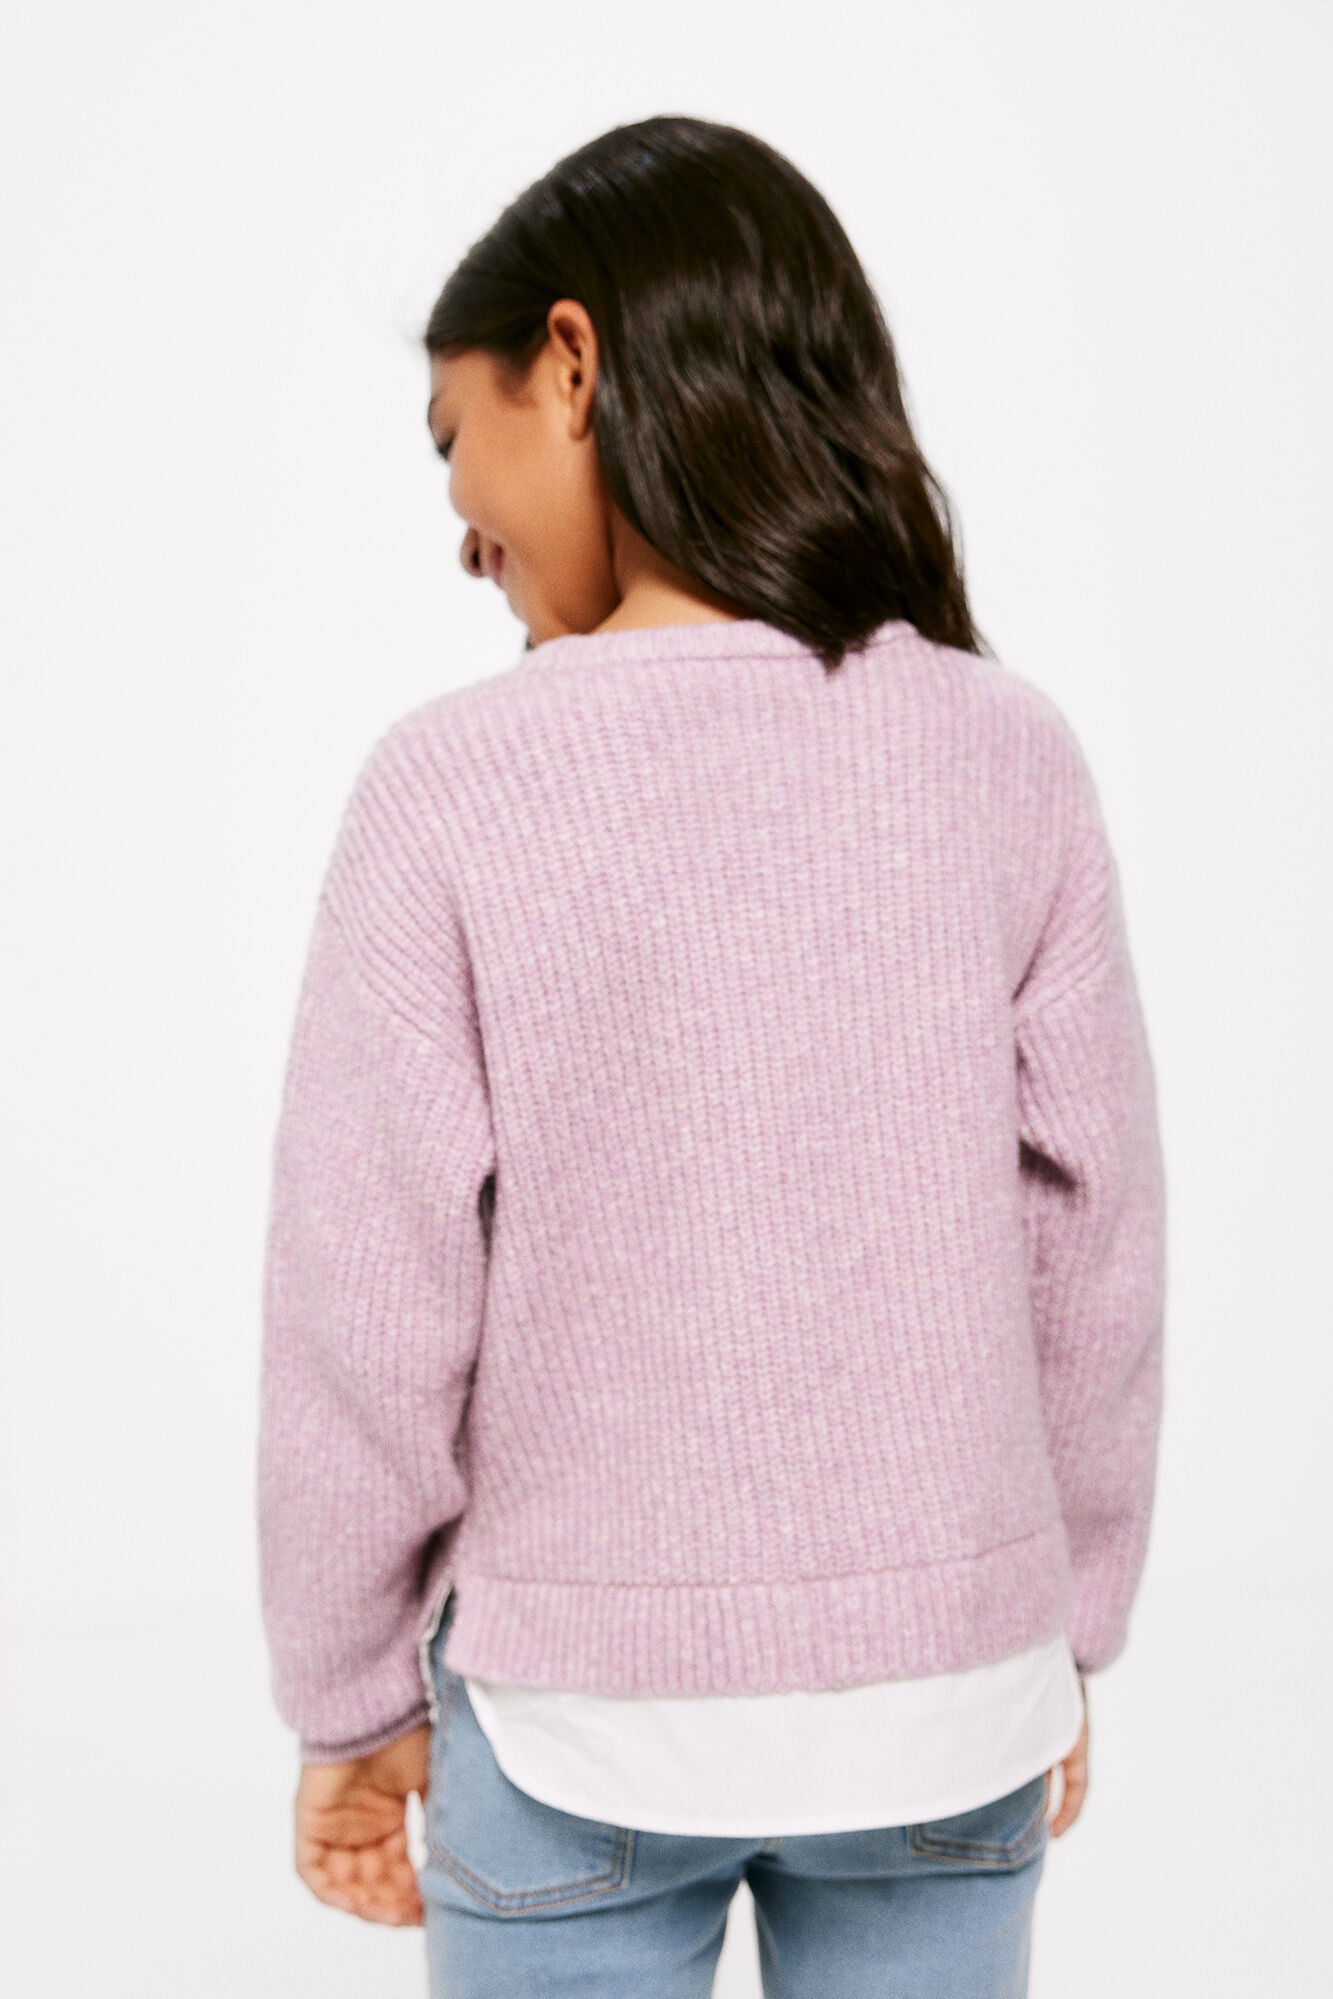 Girls' two-material jumper